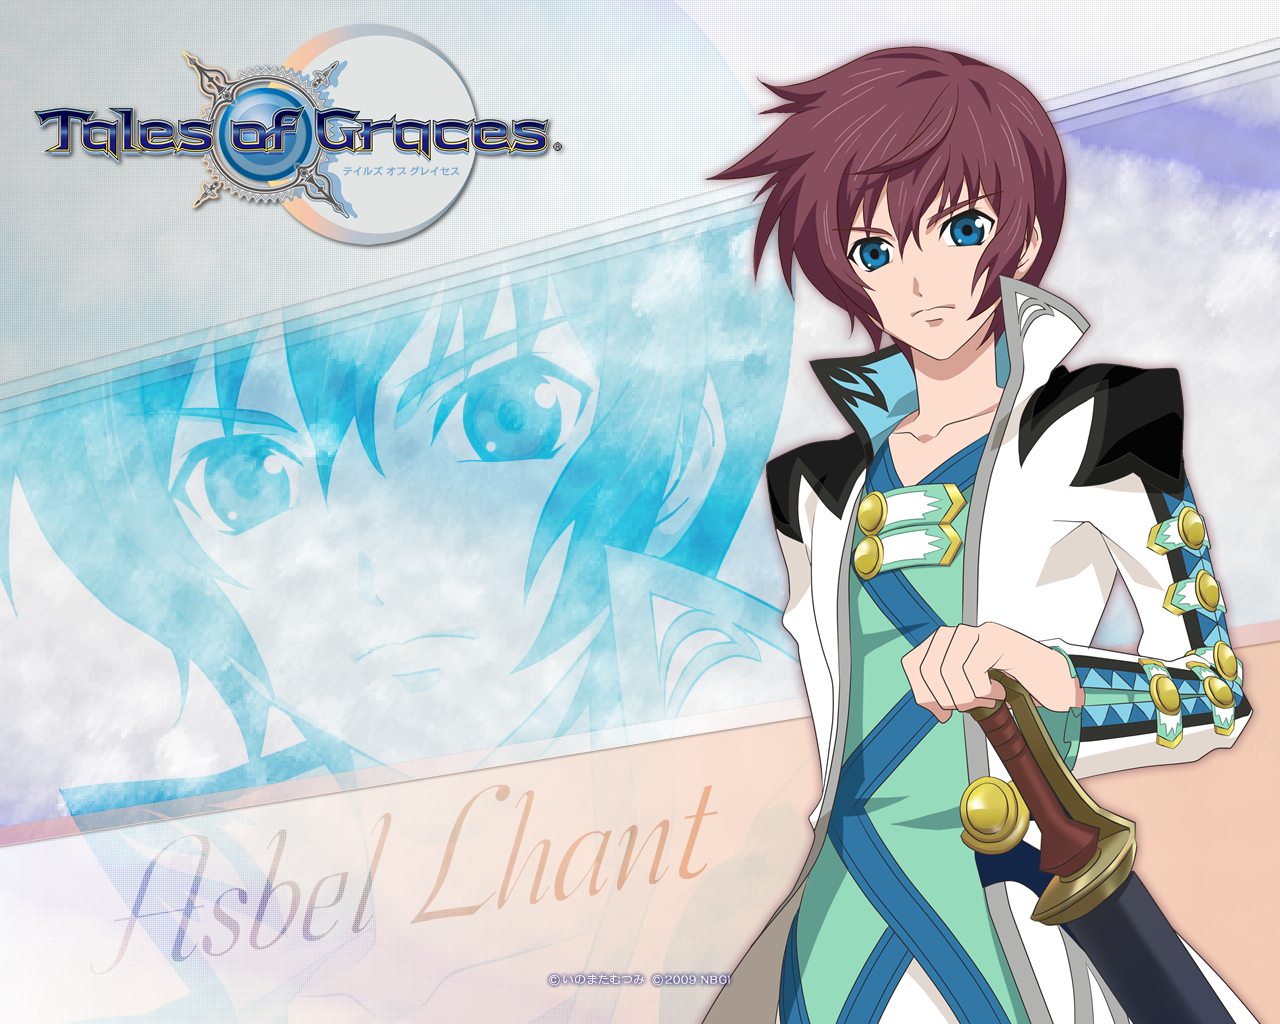 Asbel Official Wall 1280x1024
